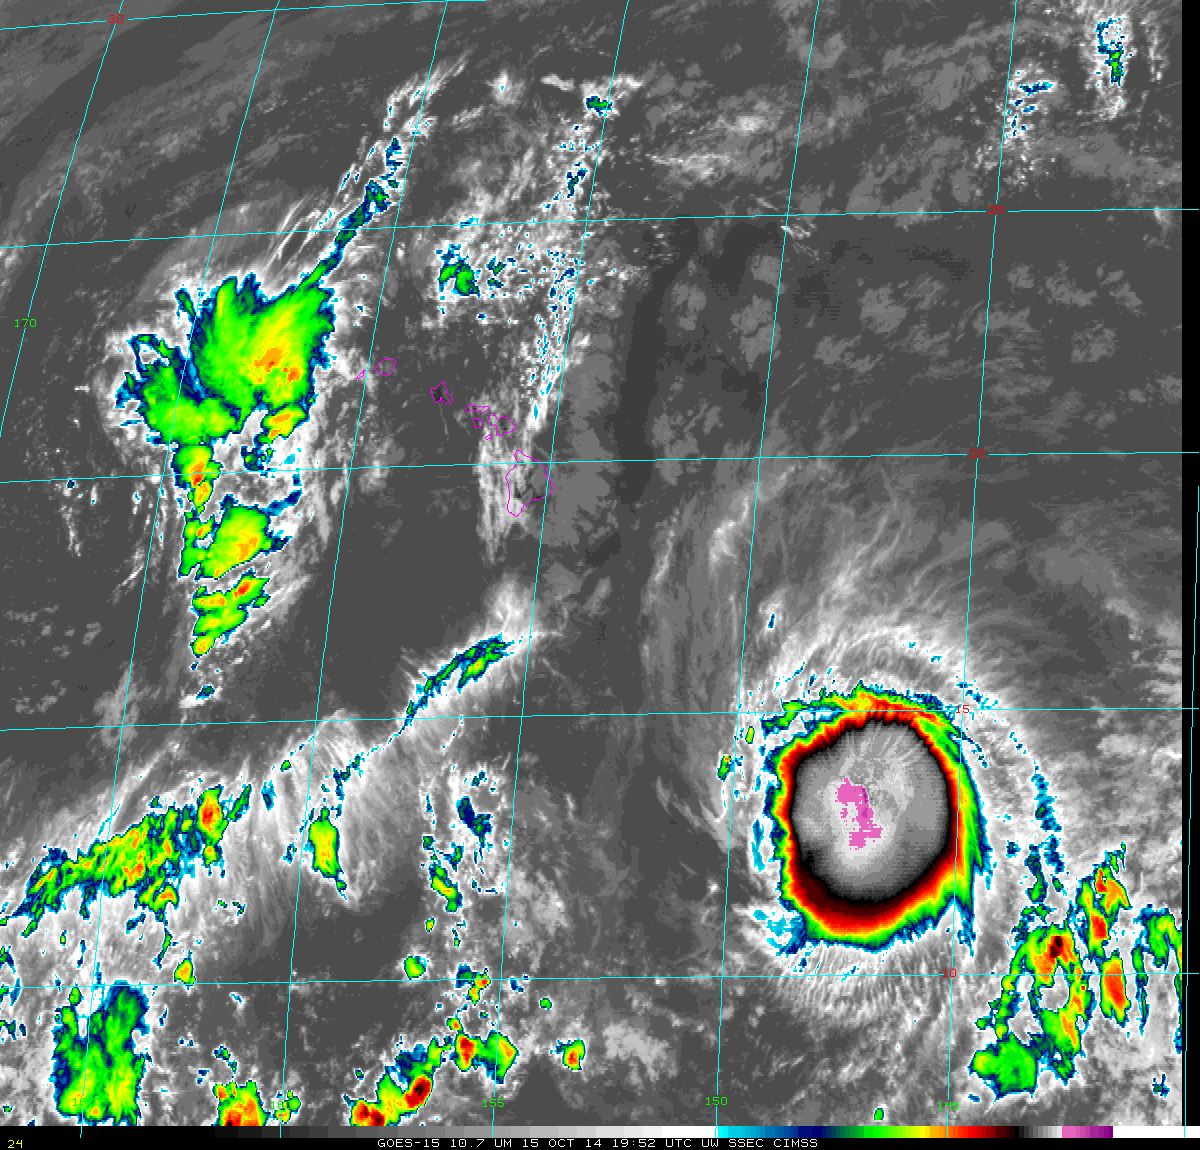 GOES-15 10.7 µm infrared channel imagery in Hawaii Sector (click to animate)